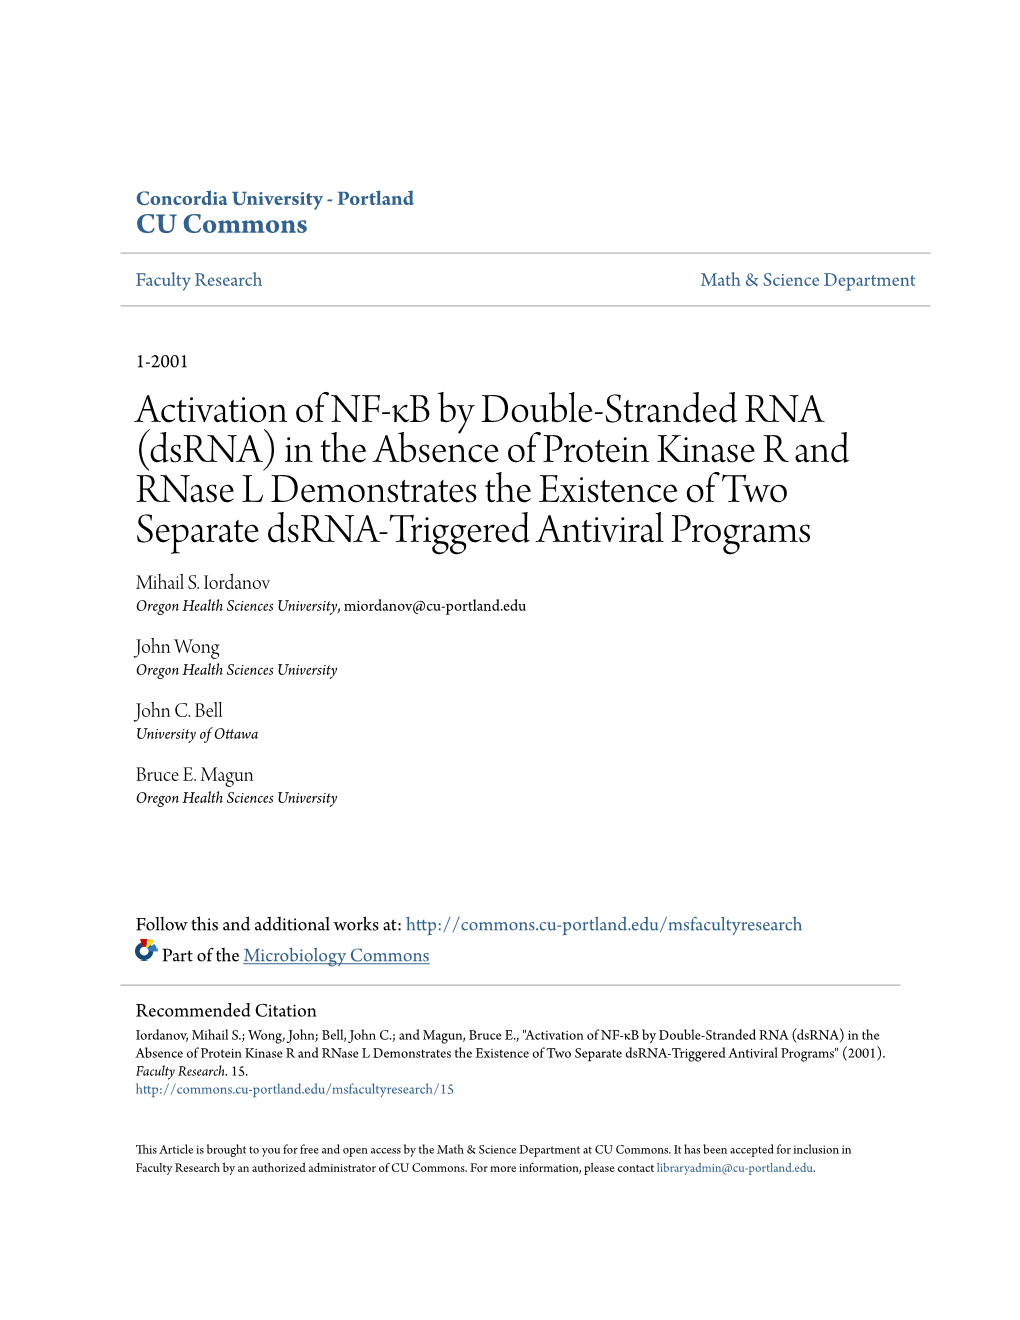 Activation of NF-Κb by Double-Stranded